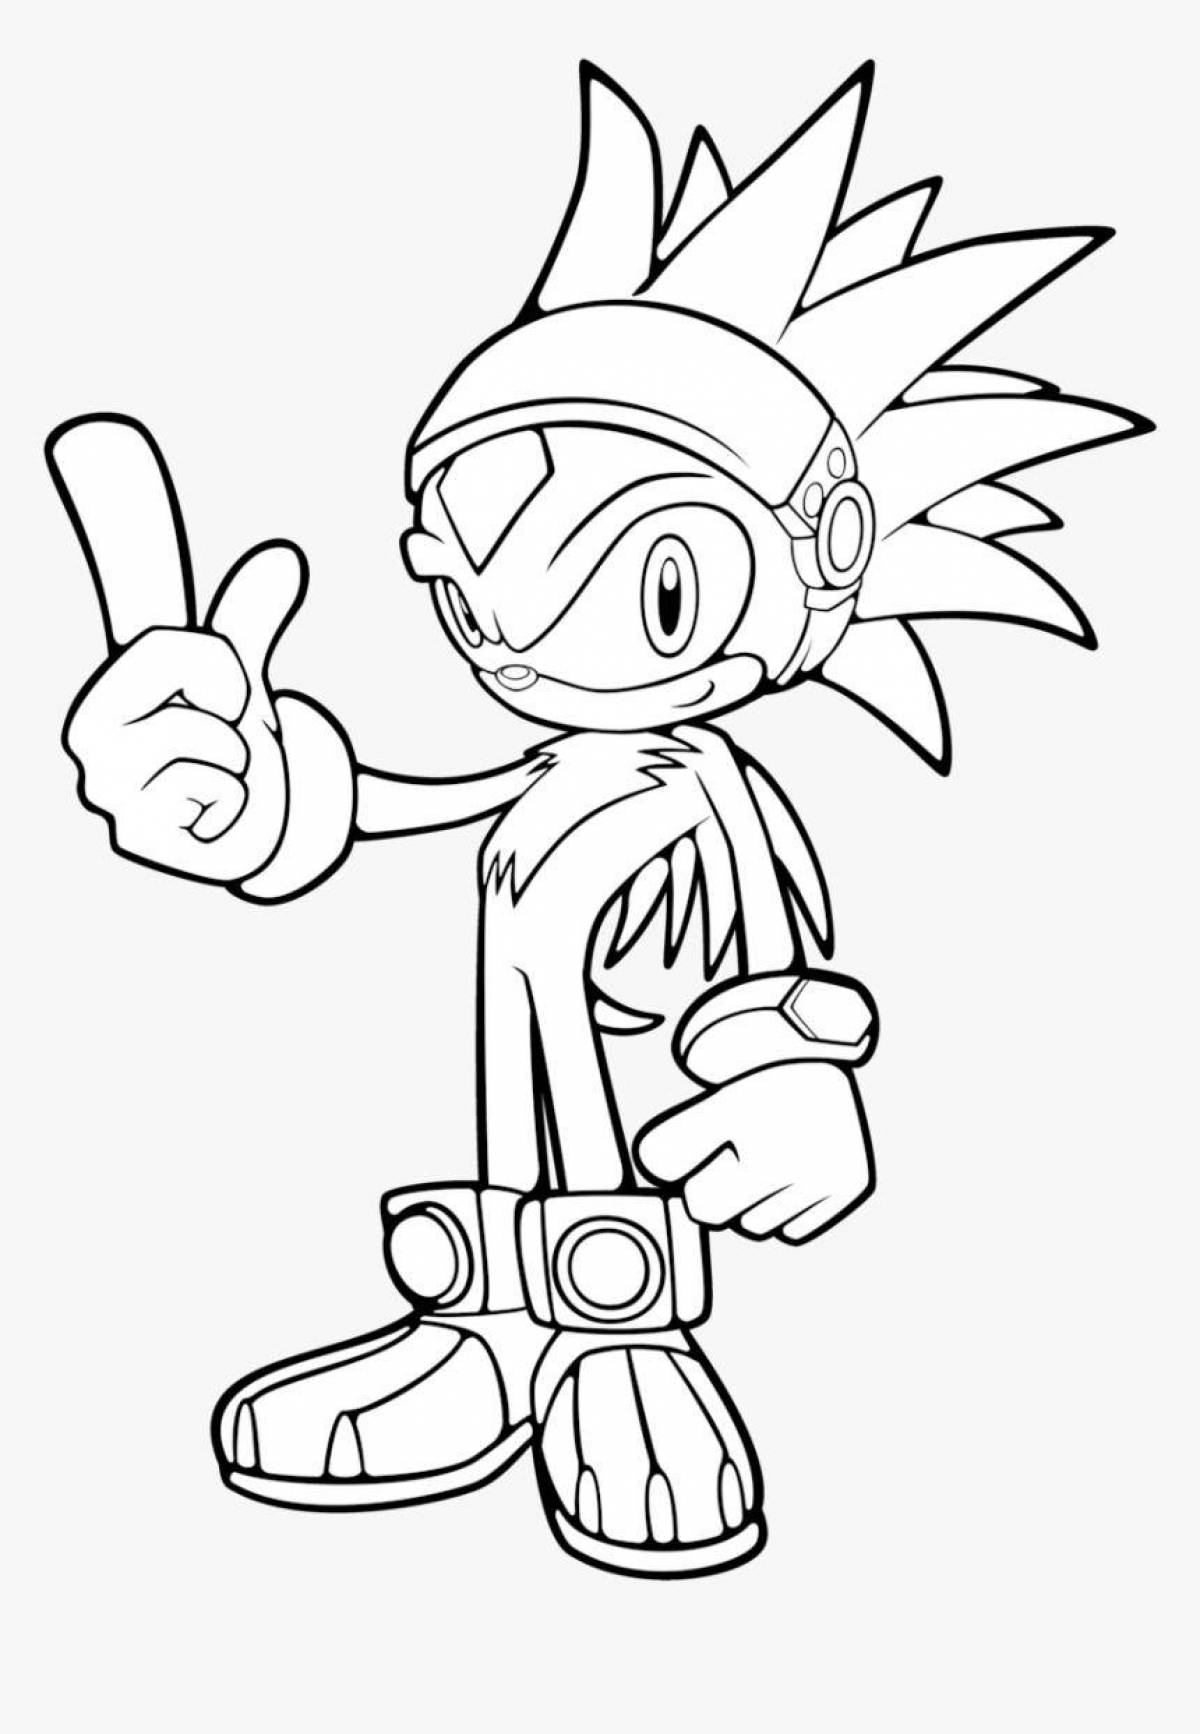 Charming sonic silver coloring book